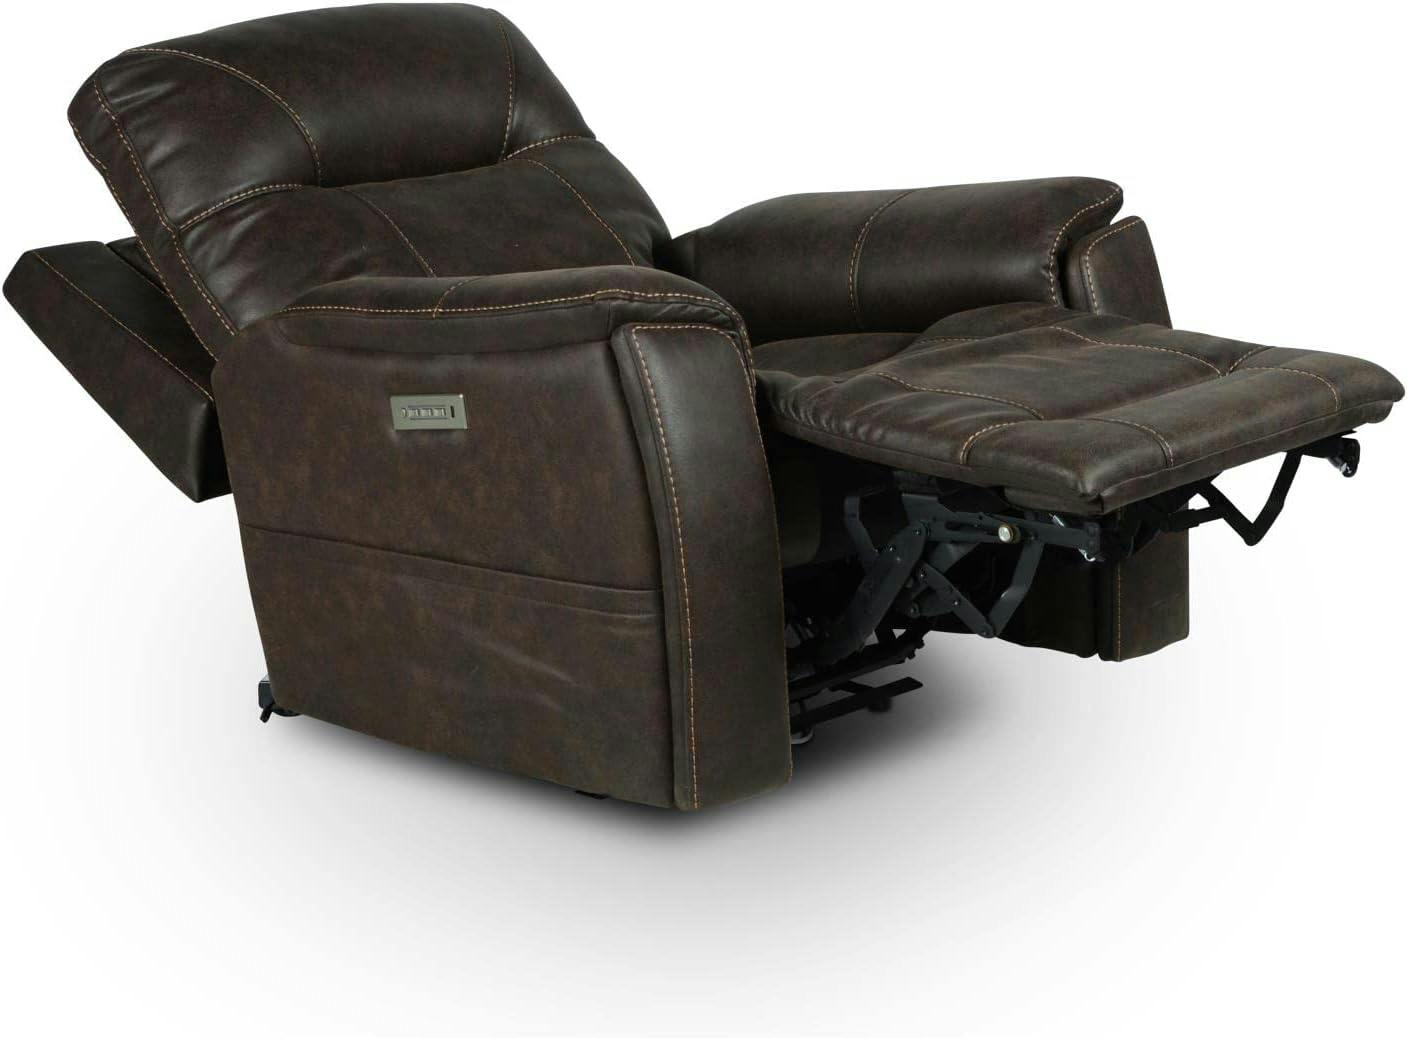 Transitional Saddle Brown Faux Leather Triple-Power Recliner